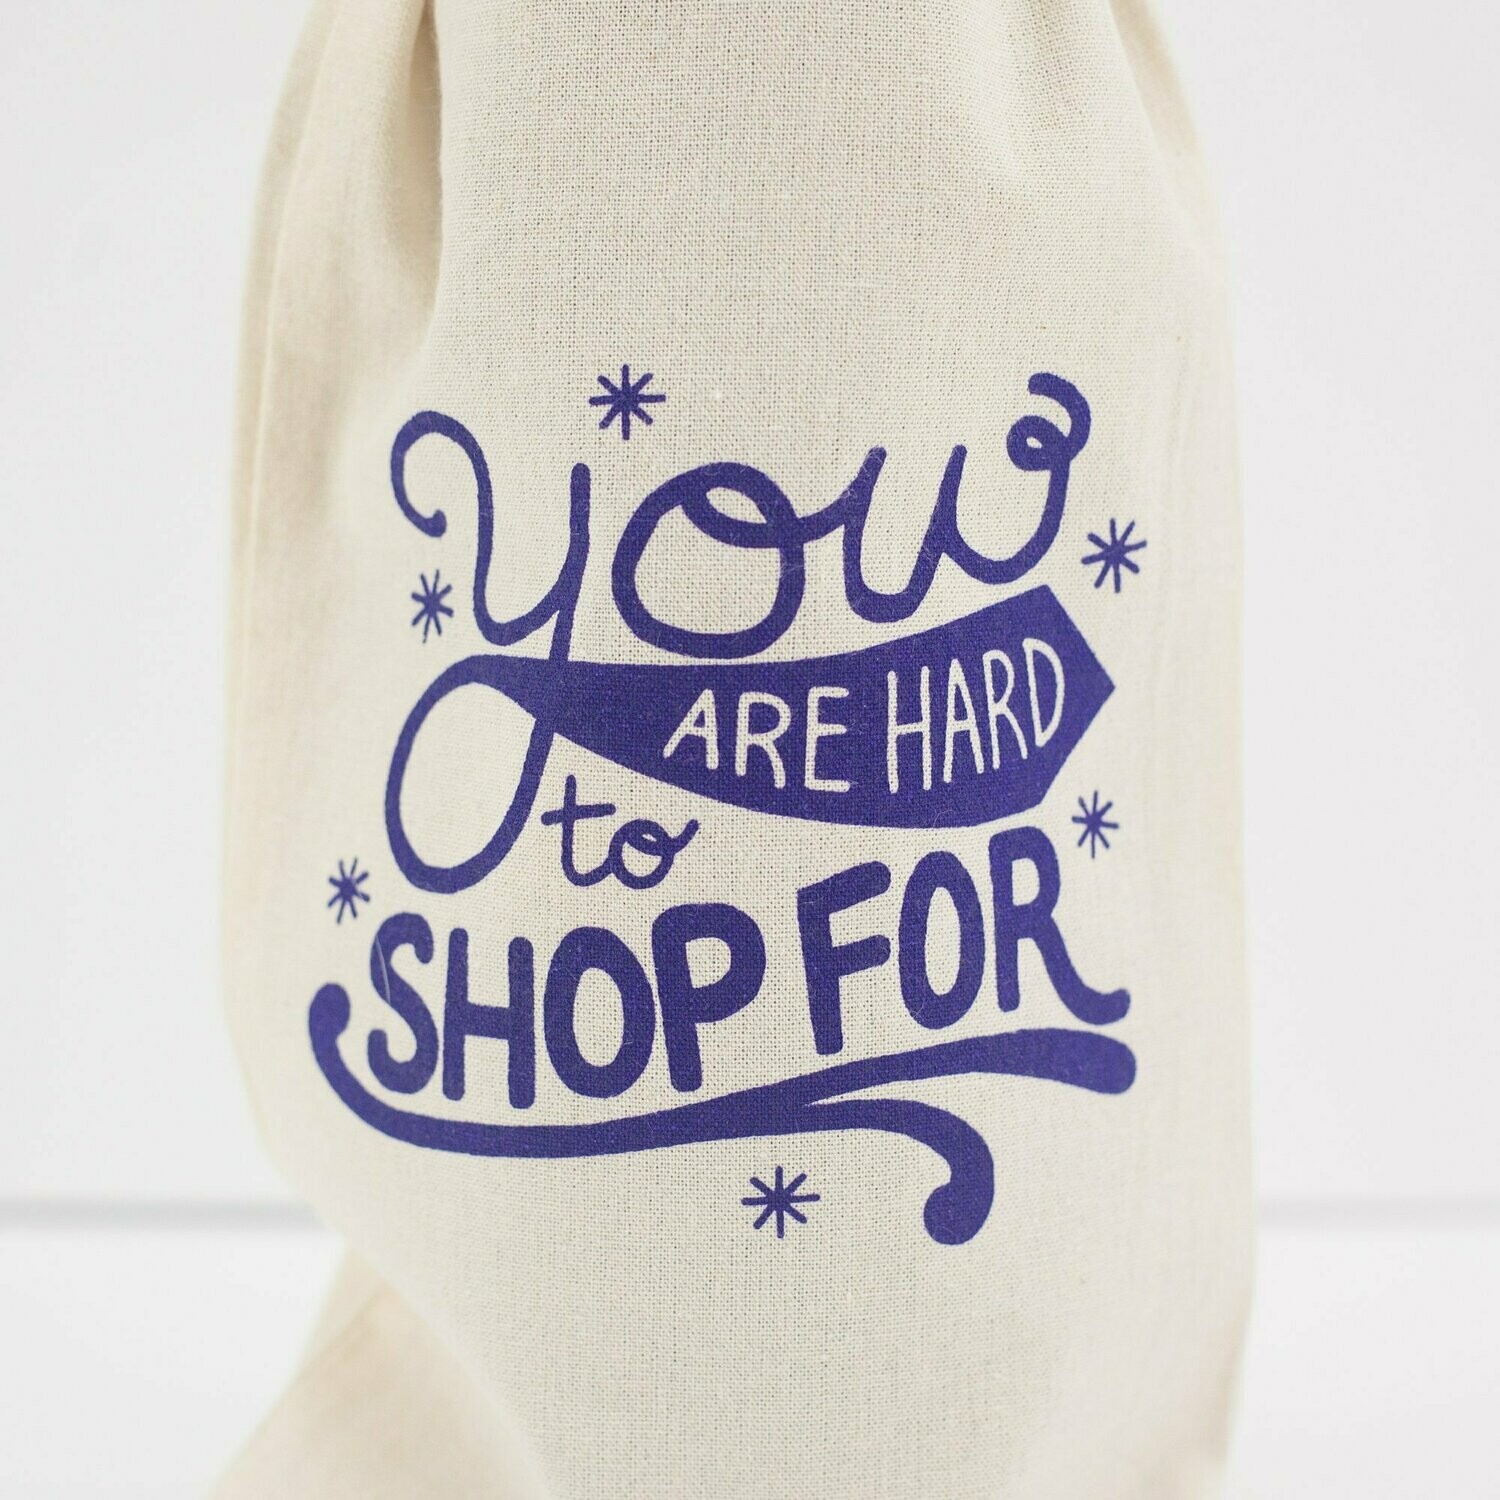 You are hard to shop for wine/gift bag by Exit343 Design